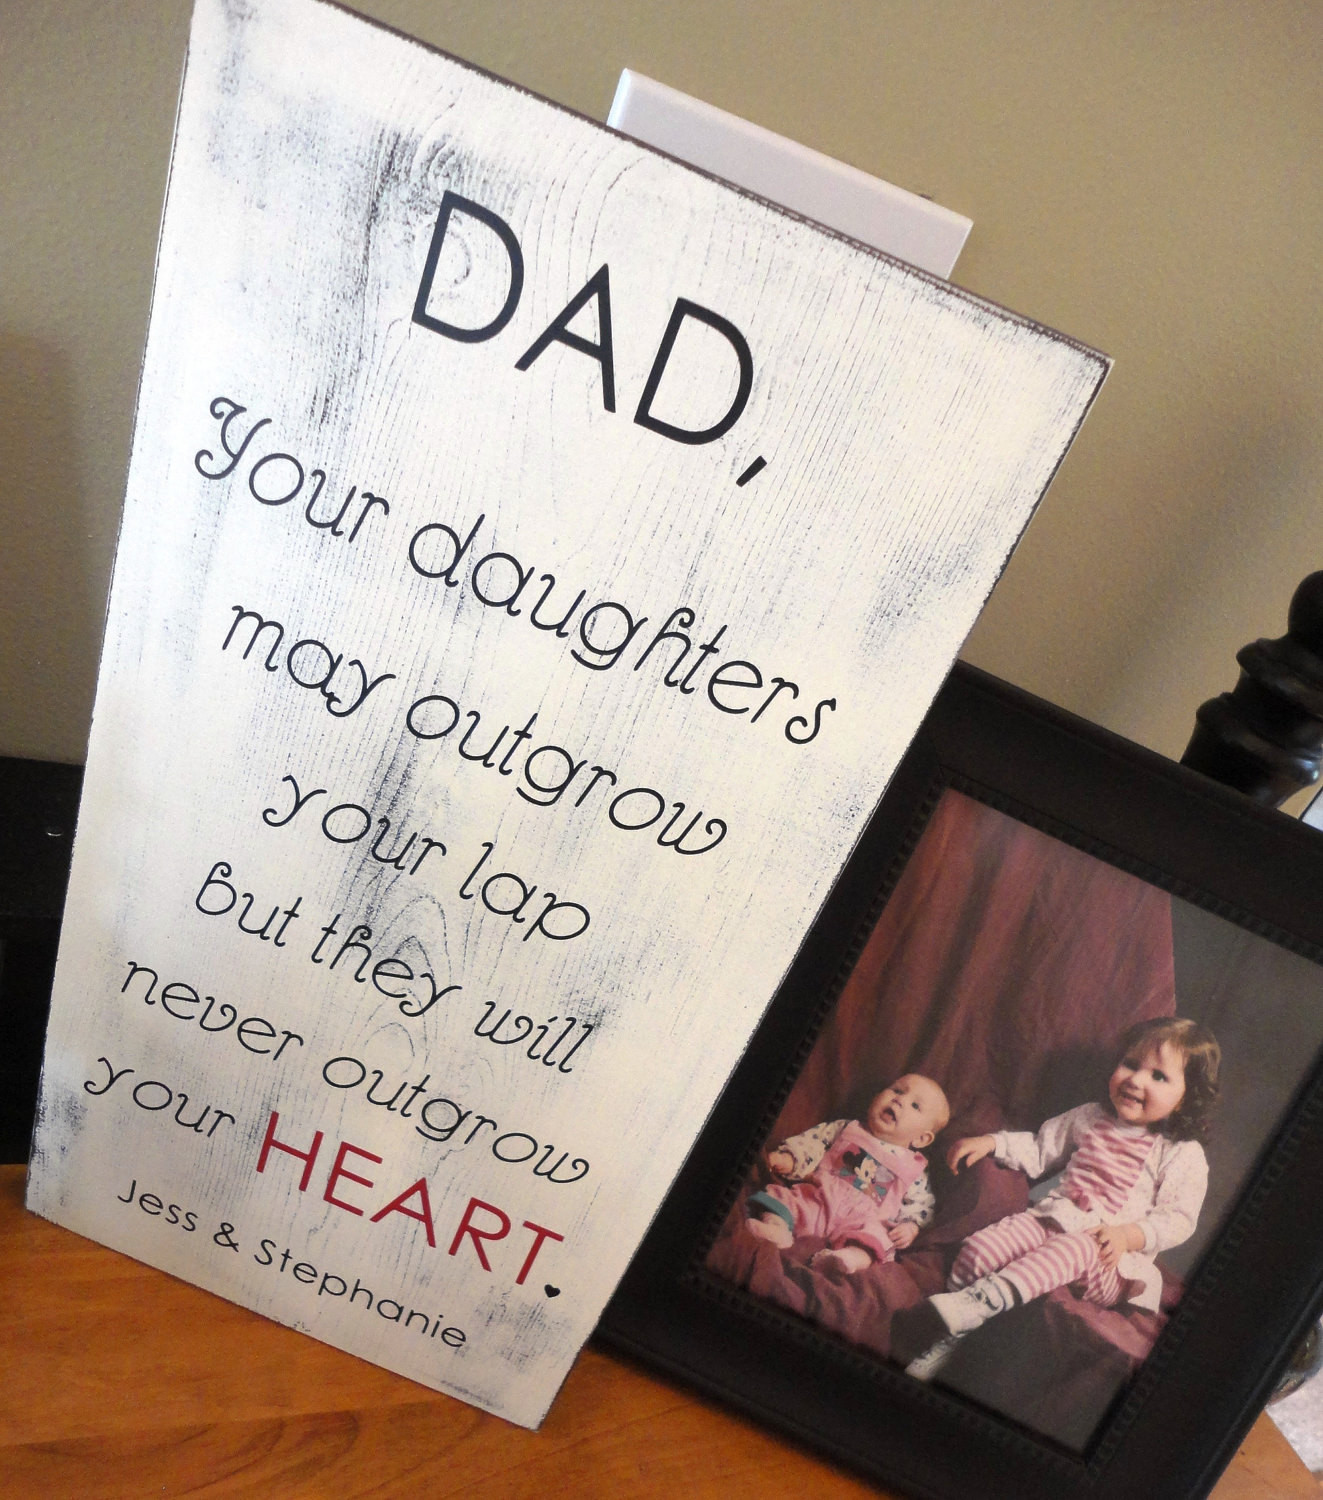 Dad Birthday Gift Ideas From Daughter
 The top 24 Ideas About Dad Birthday Gifts From Daughter